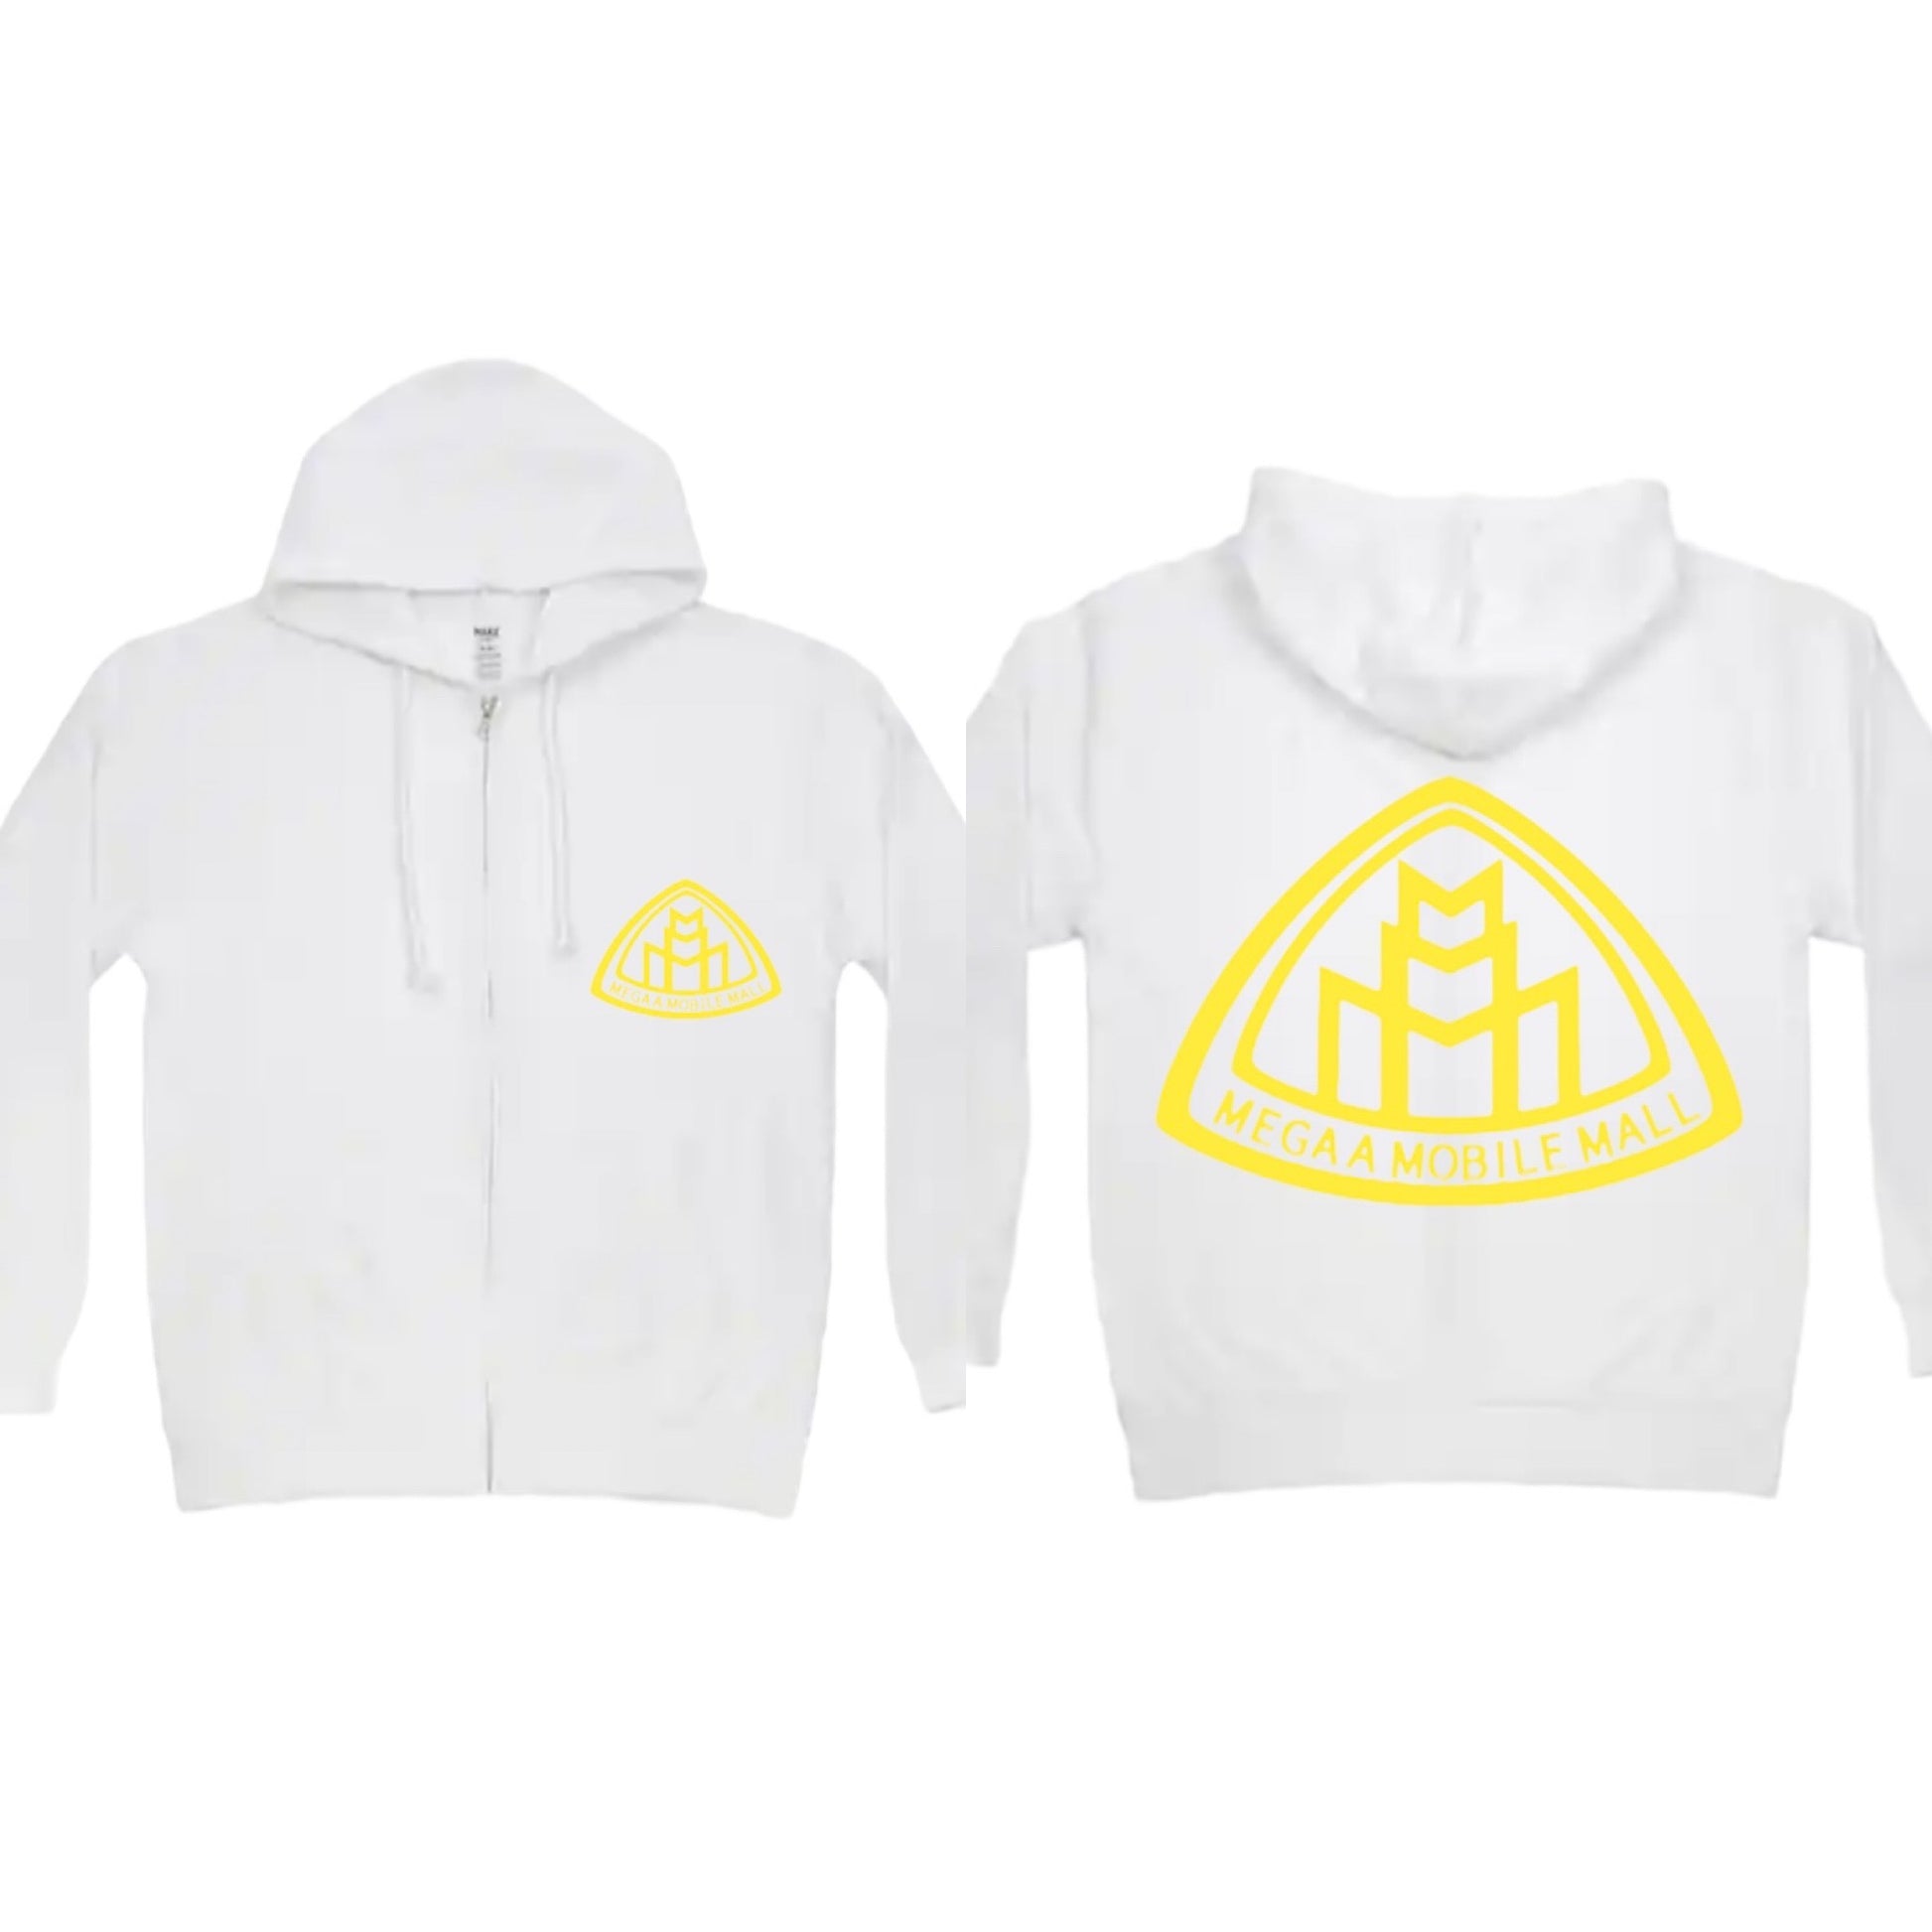 megaamobilemall white zip up hoodie with yellow logo